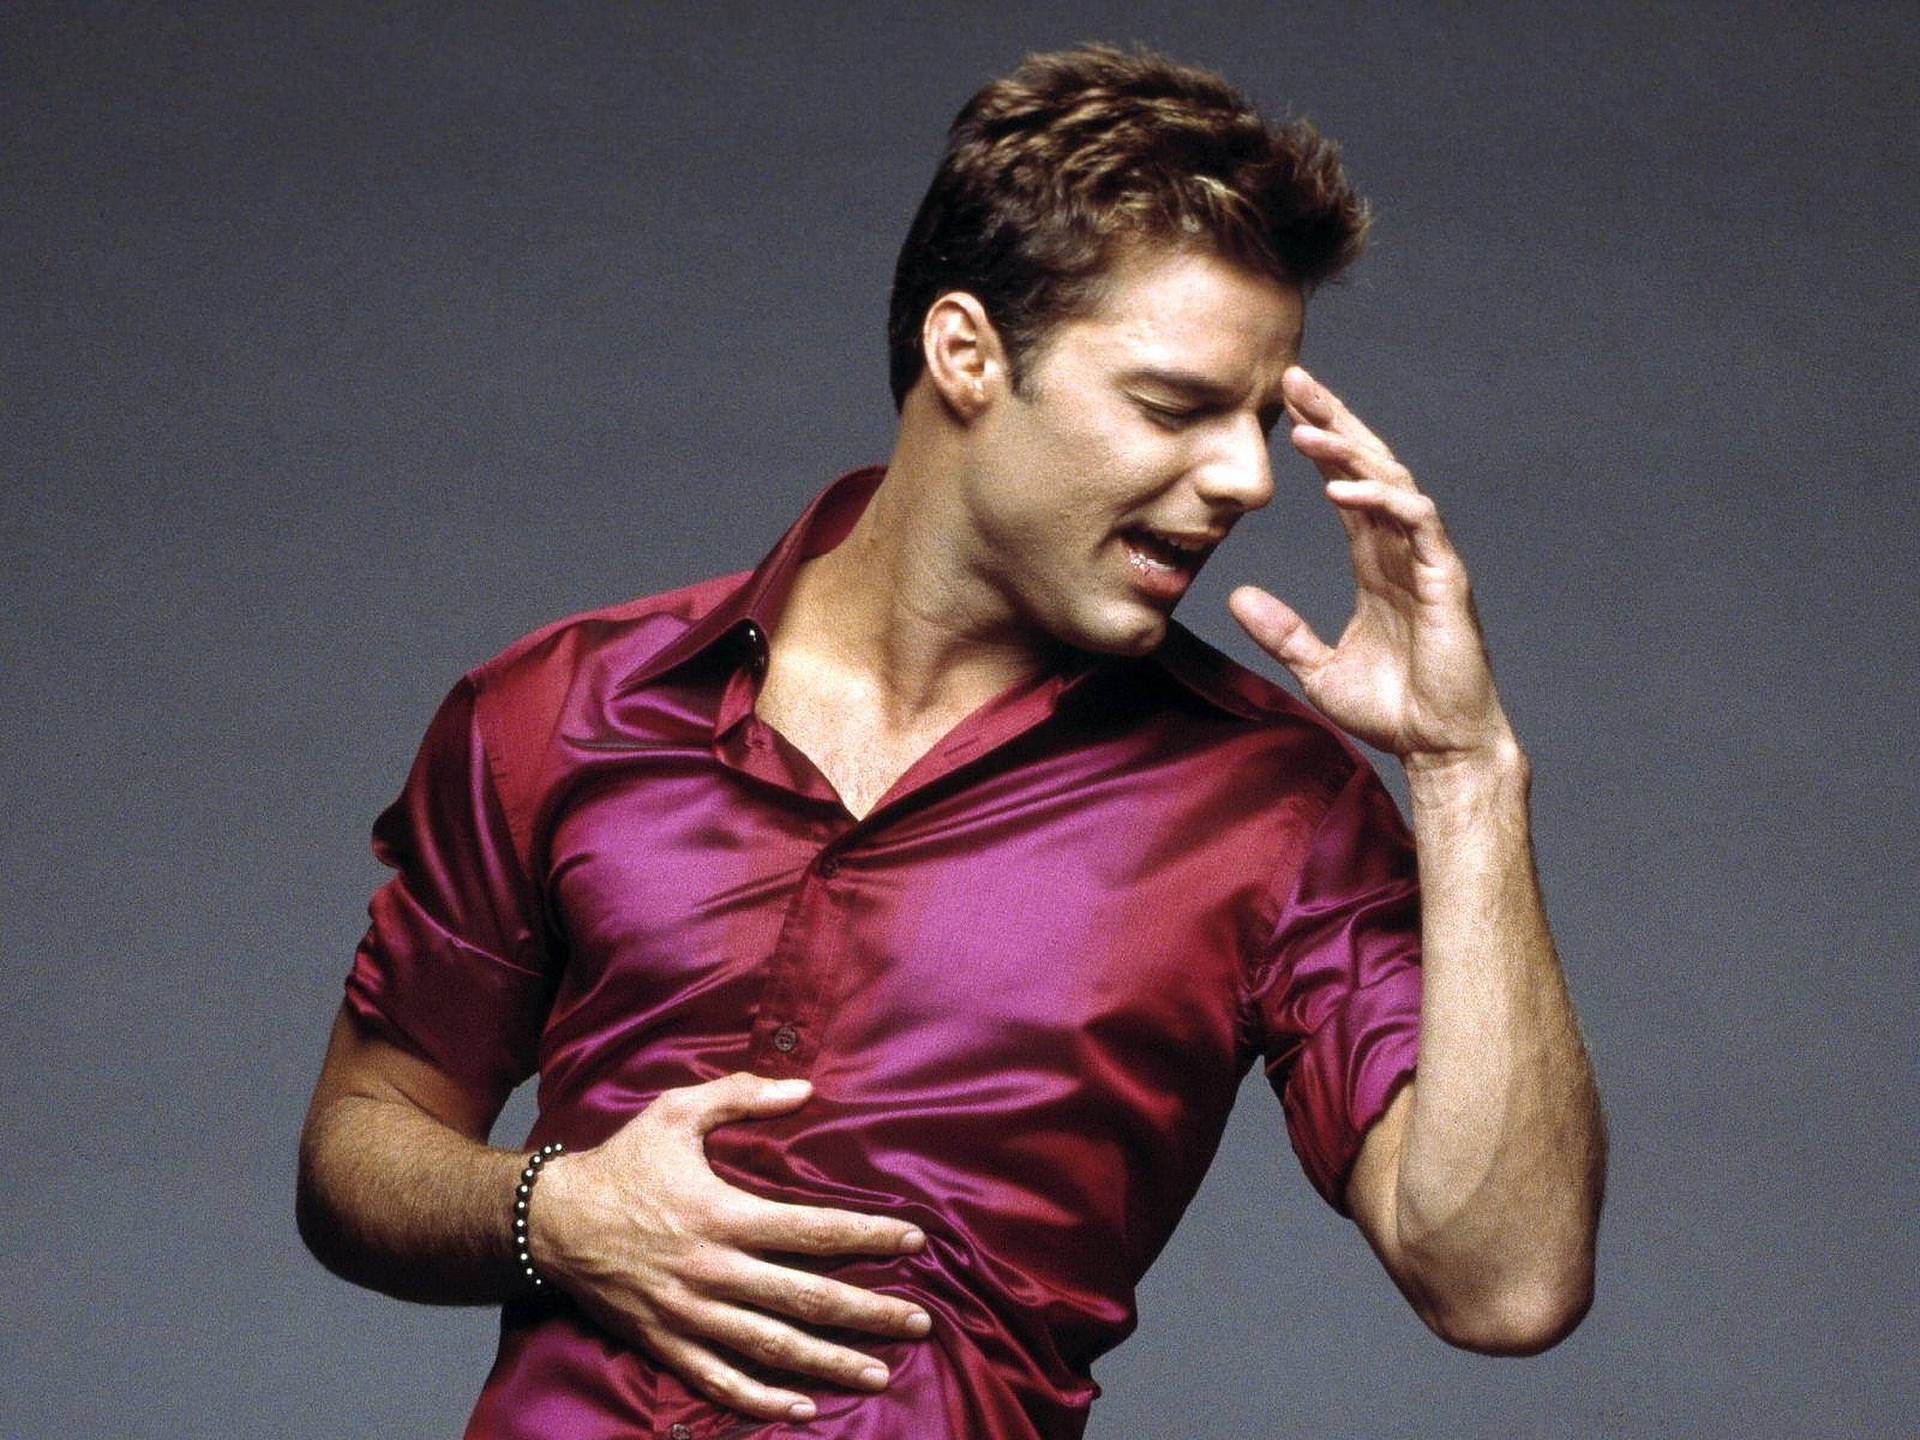 Rickymartin Maroon Shirt In German Would Be 